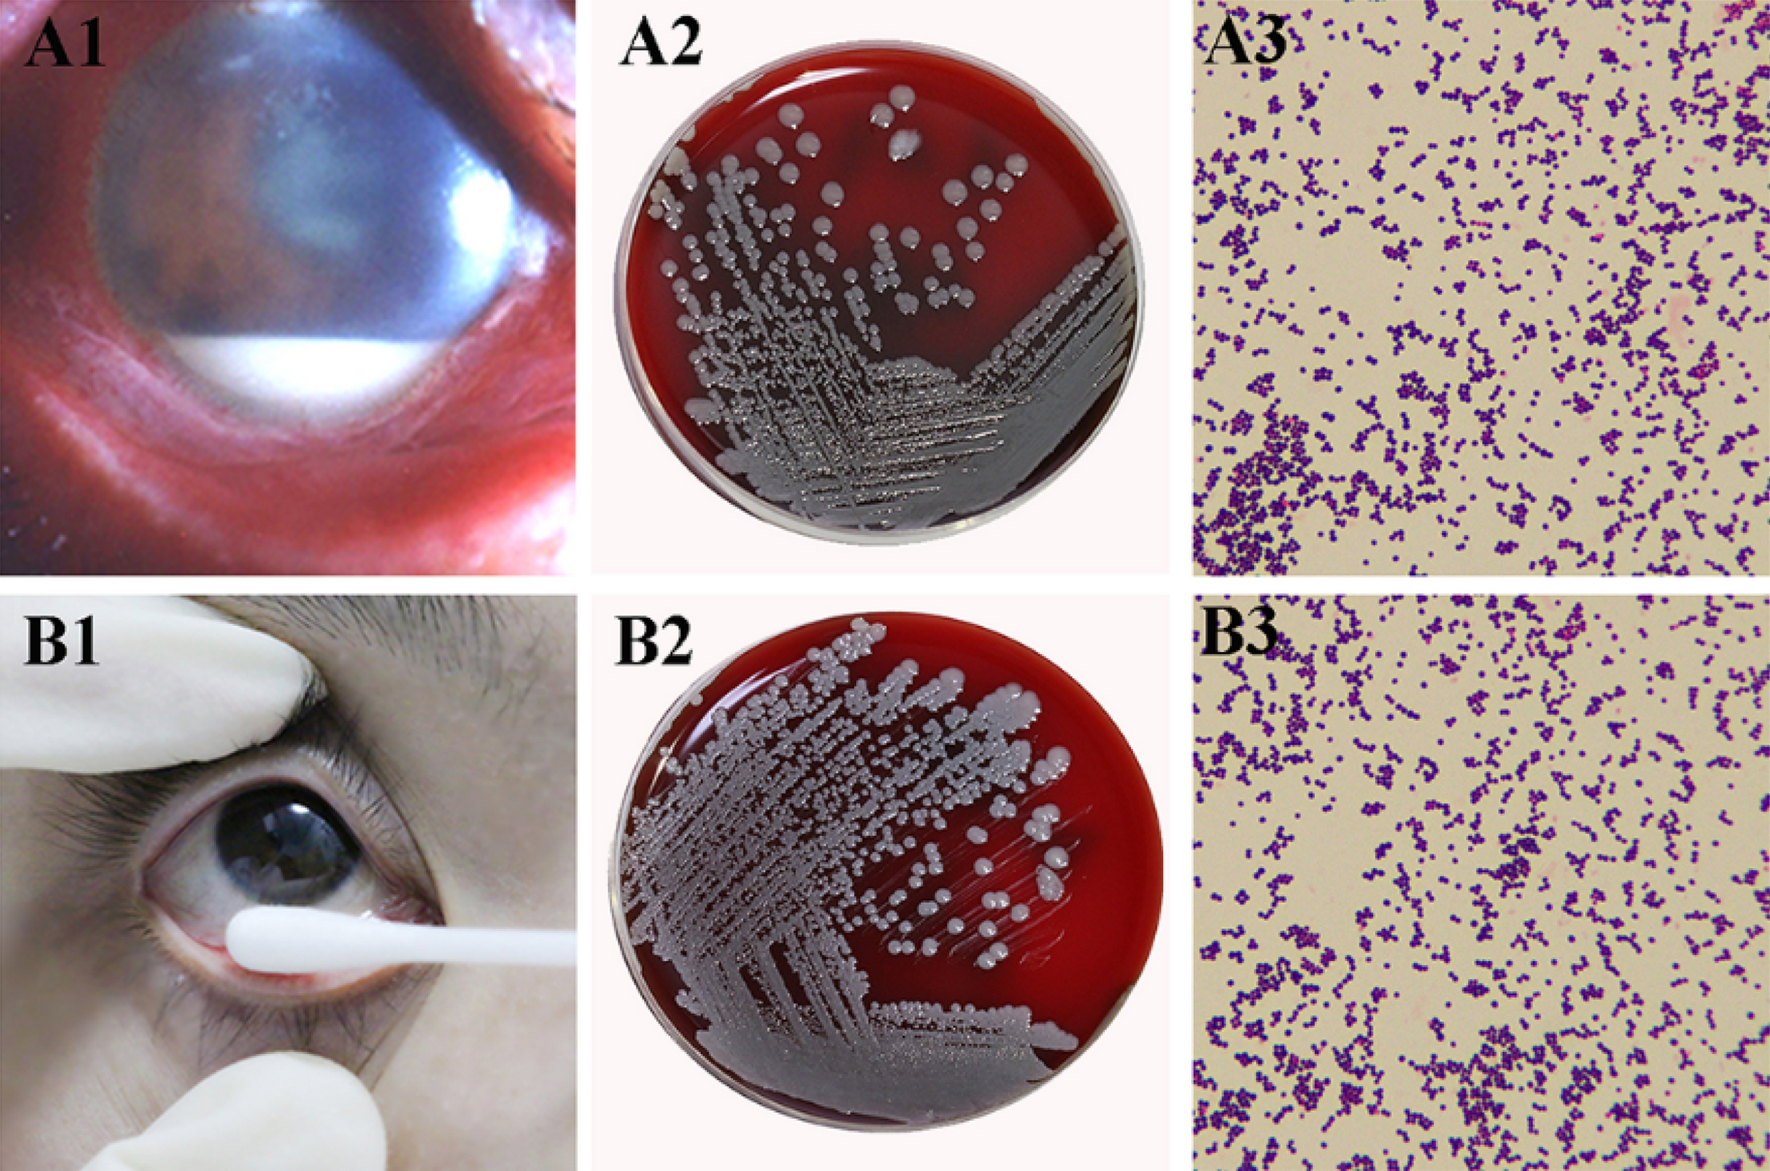 Staphylococcus epidermidis: Trends in Microbiology